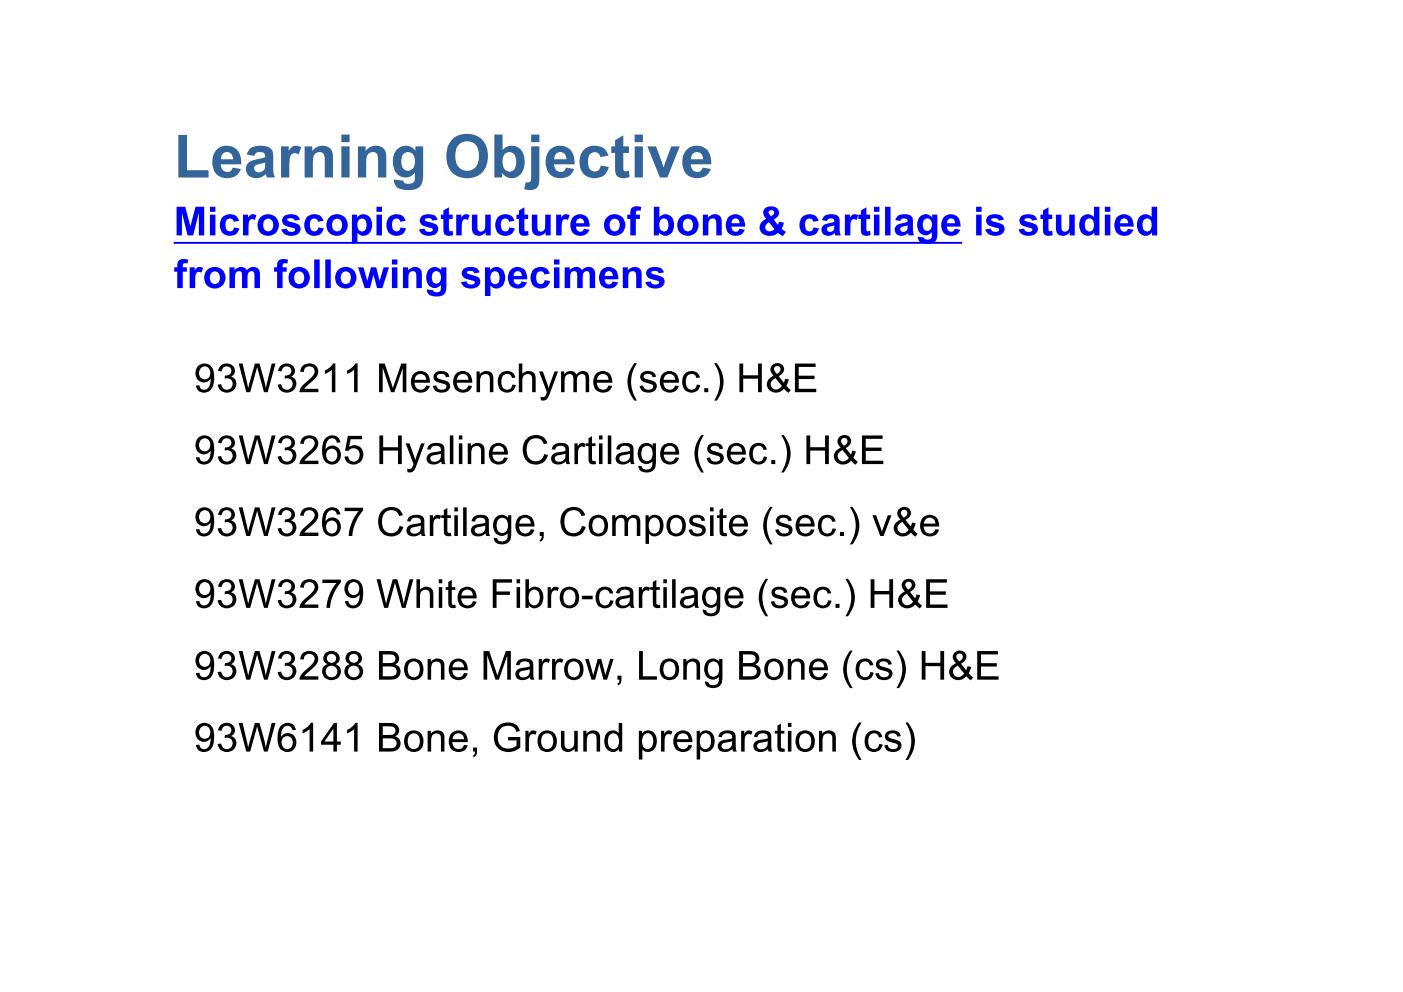 block6-1_03.jpg - Learning ObjectiveMicroscopic structure of bone & cartilage is studiedfrom following specimens 93W3211 Mesenchyme (sec.) H&E 93W3265 Hyaline Cartilage (sec.) H&E 93W3267 Cartilage, Composite (sec.) v&e 93W3279 White Fibro-cartilage (sec.) H&E 93W3288 Bone Marrow, Long Bone (cs) H&E 93W6141 Bone, Ground preparation (cs)